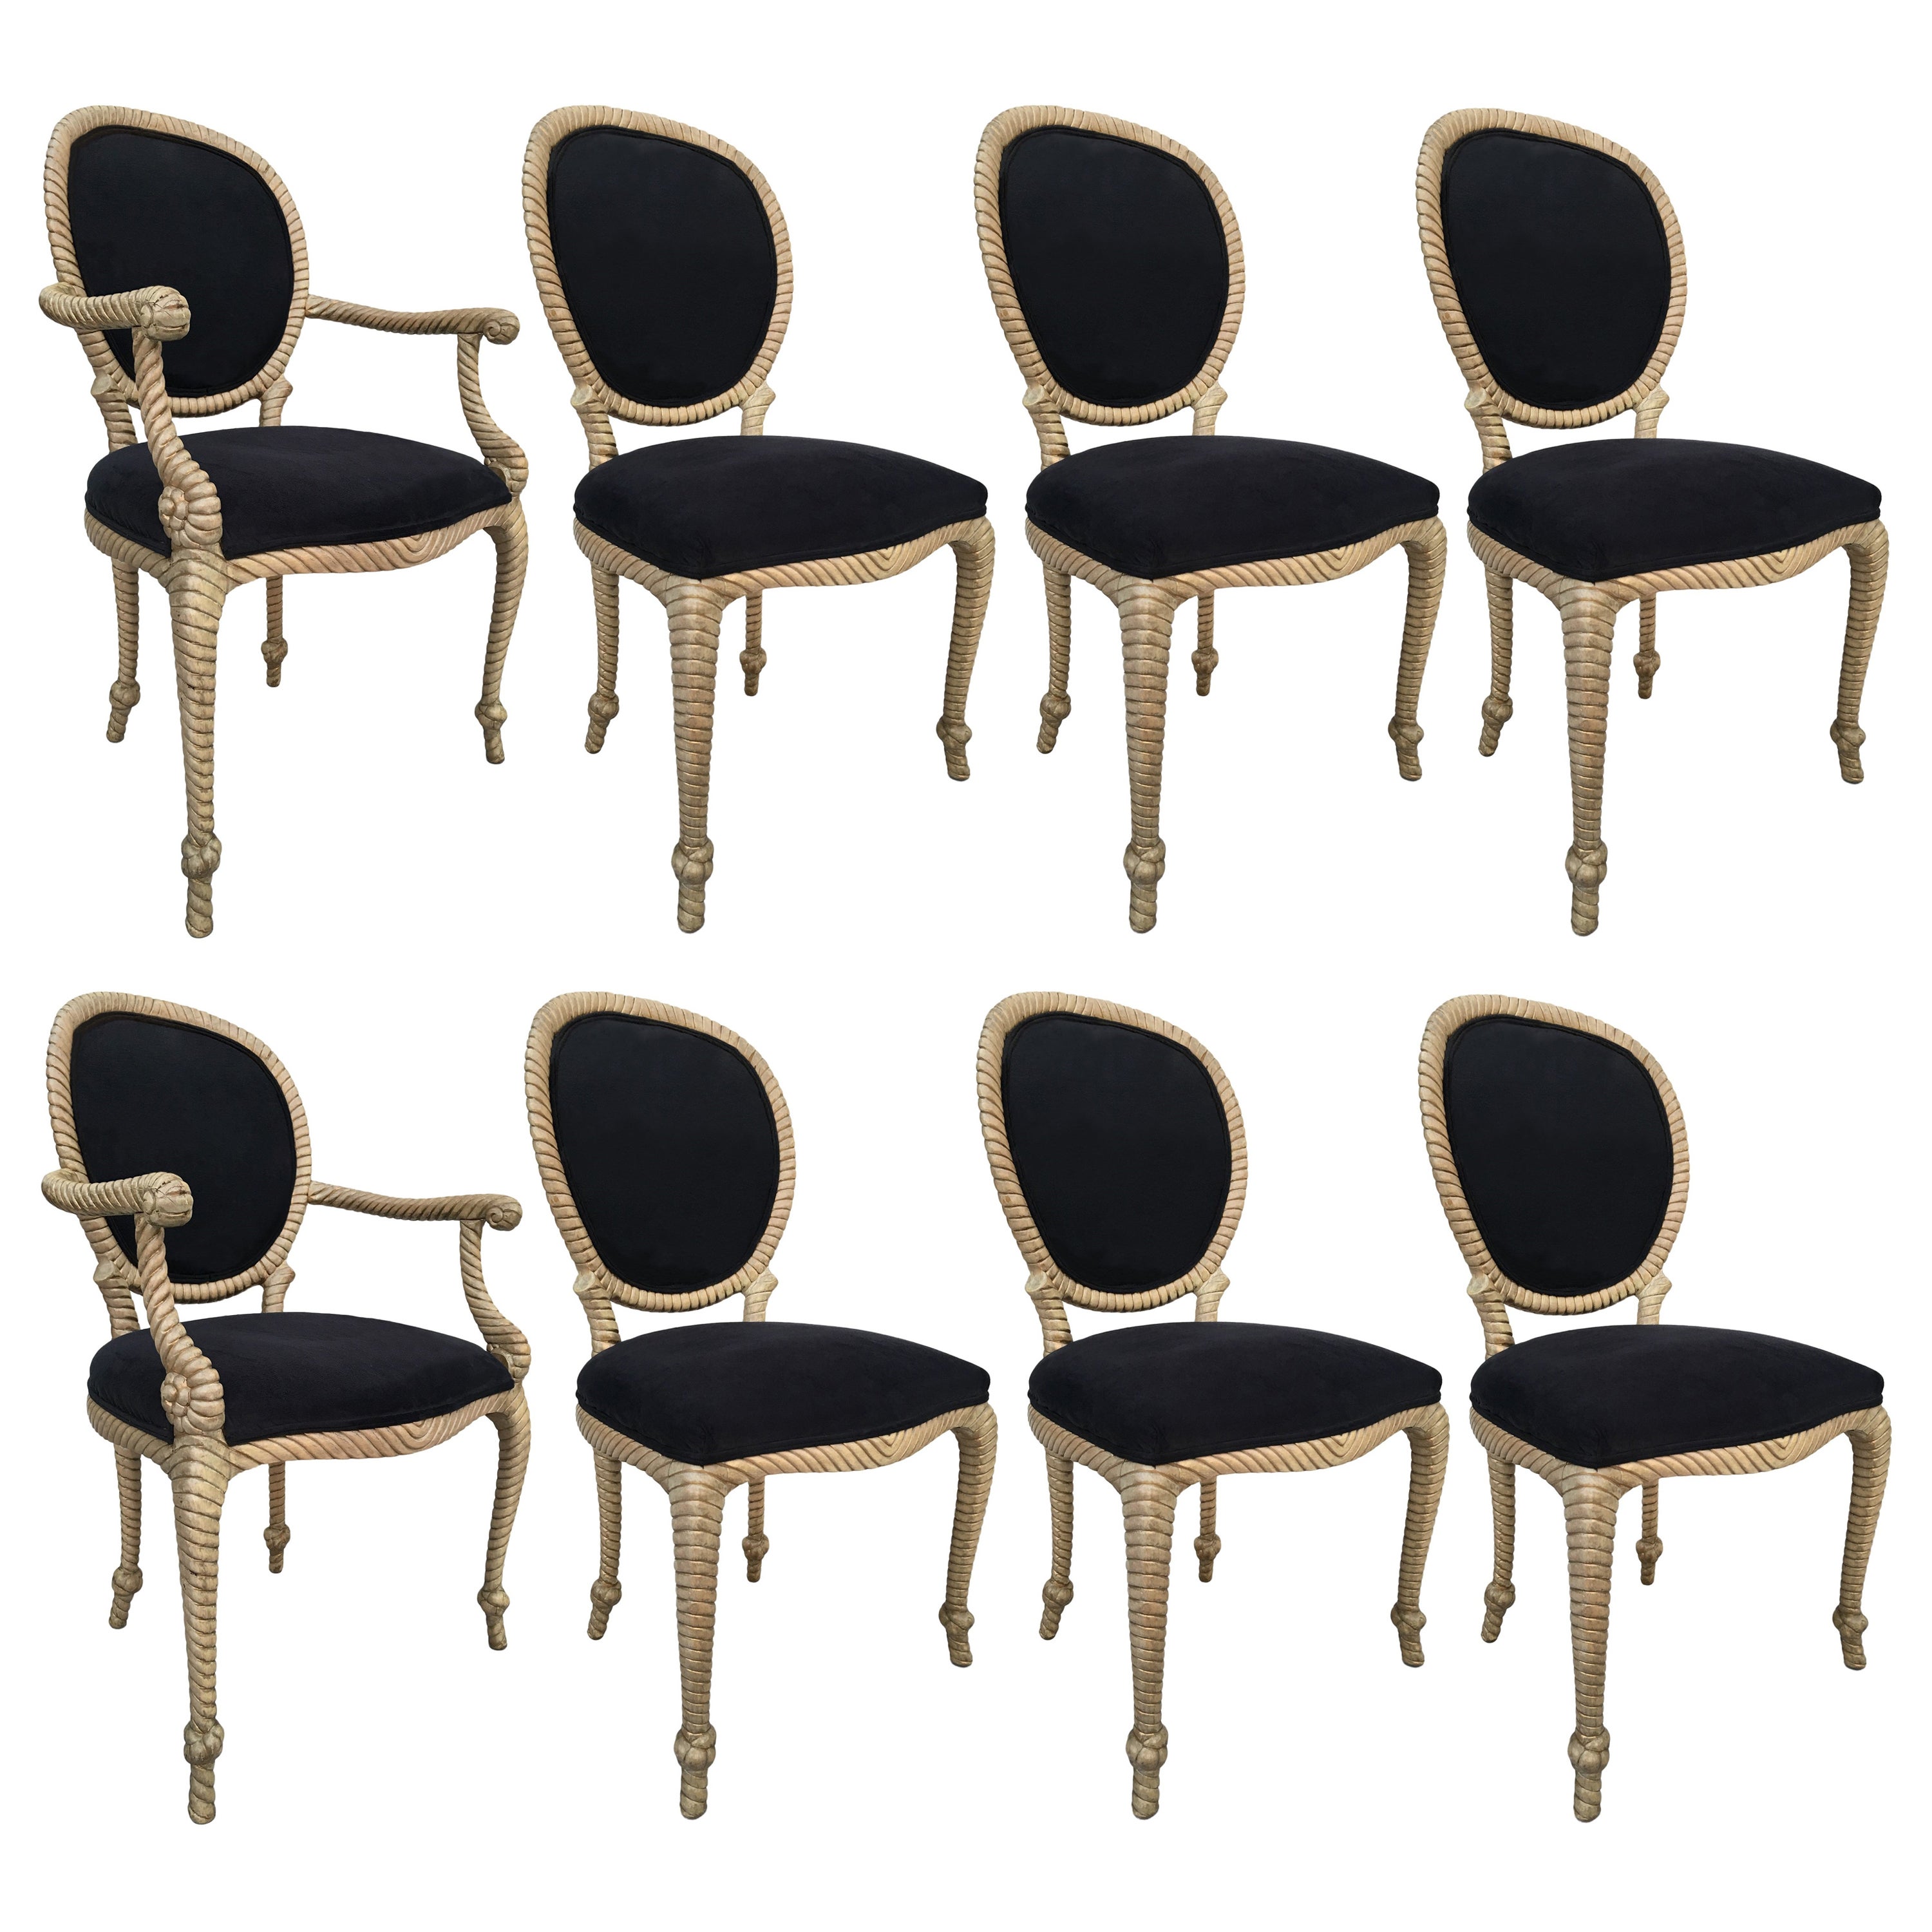 Italian Comini & Modonutti Carved Knotted Rope Chairs, Set of 8 For Sale